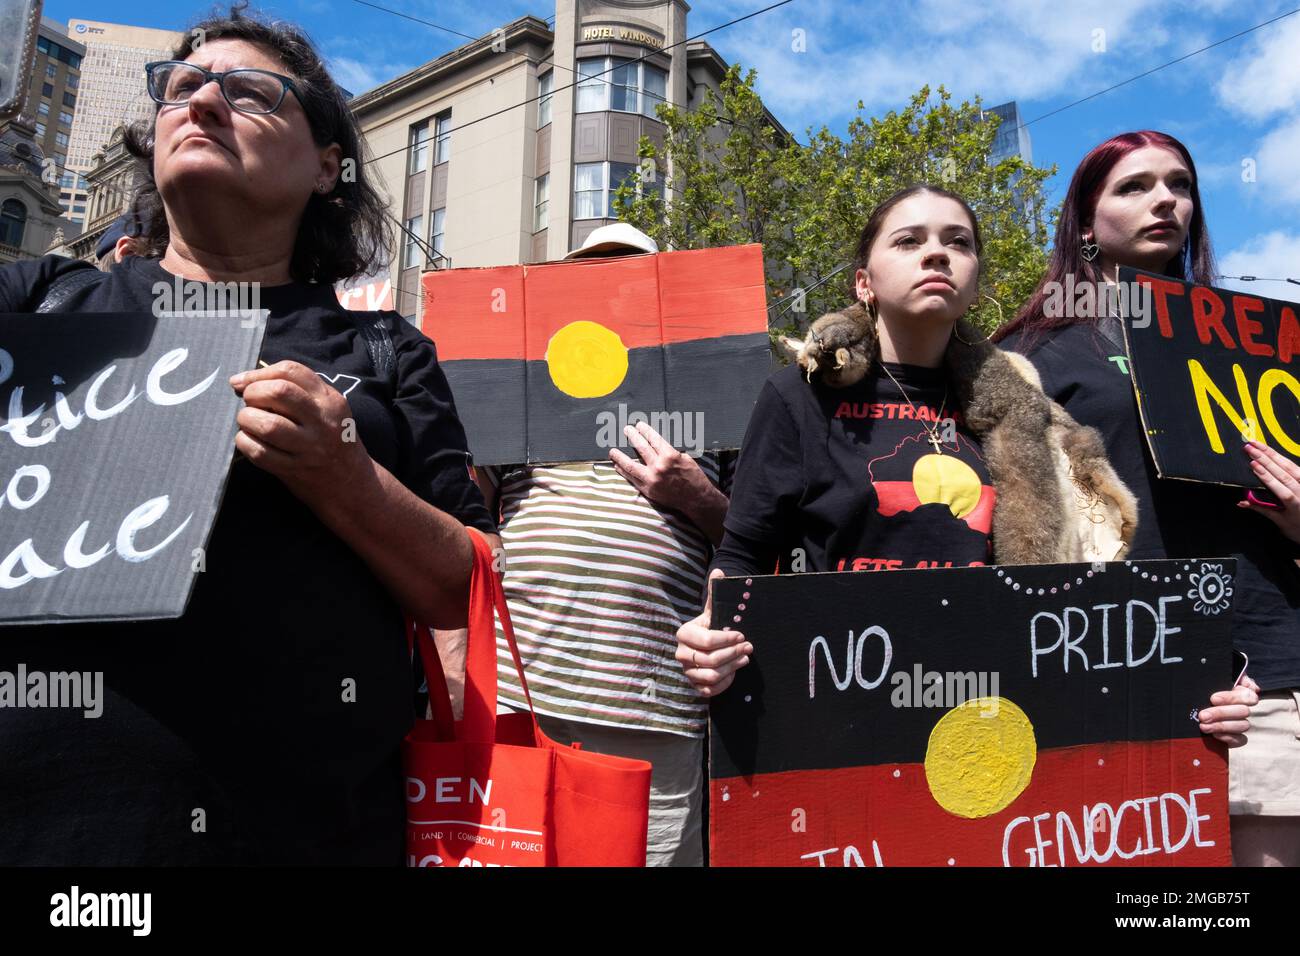 Demonstrators hold placards at the Invasion Day rally in Melbourne, Victoria, Australia. Stock Photo